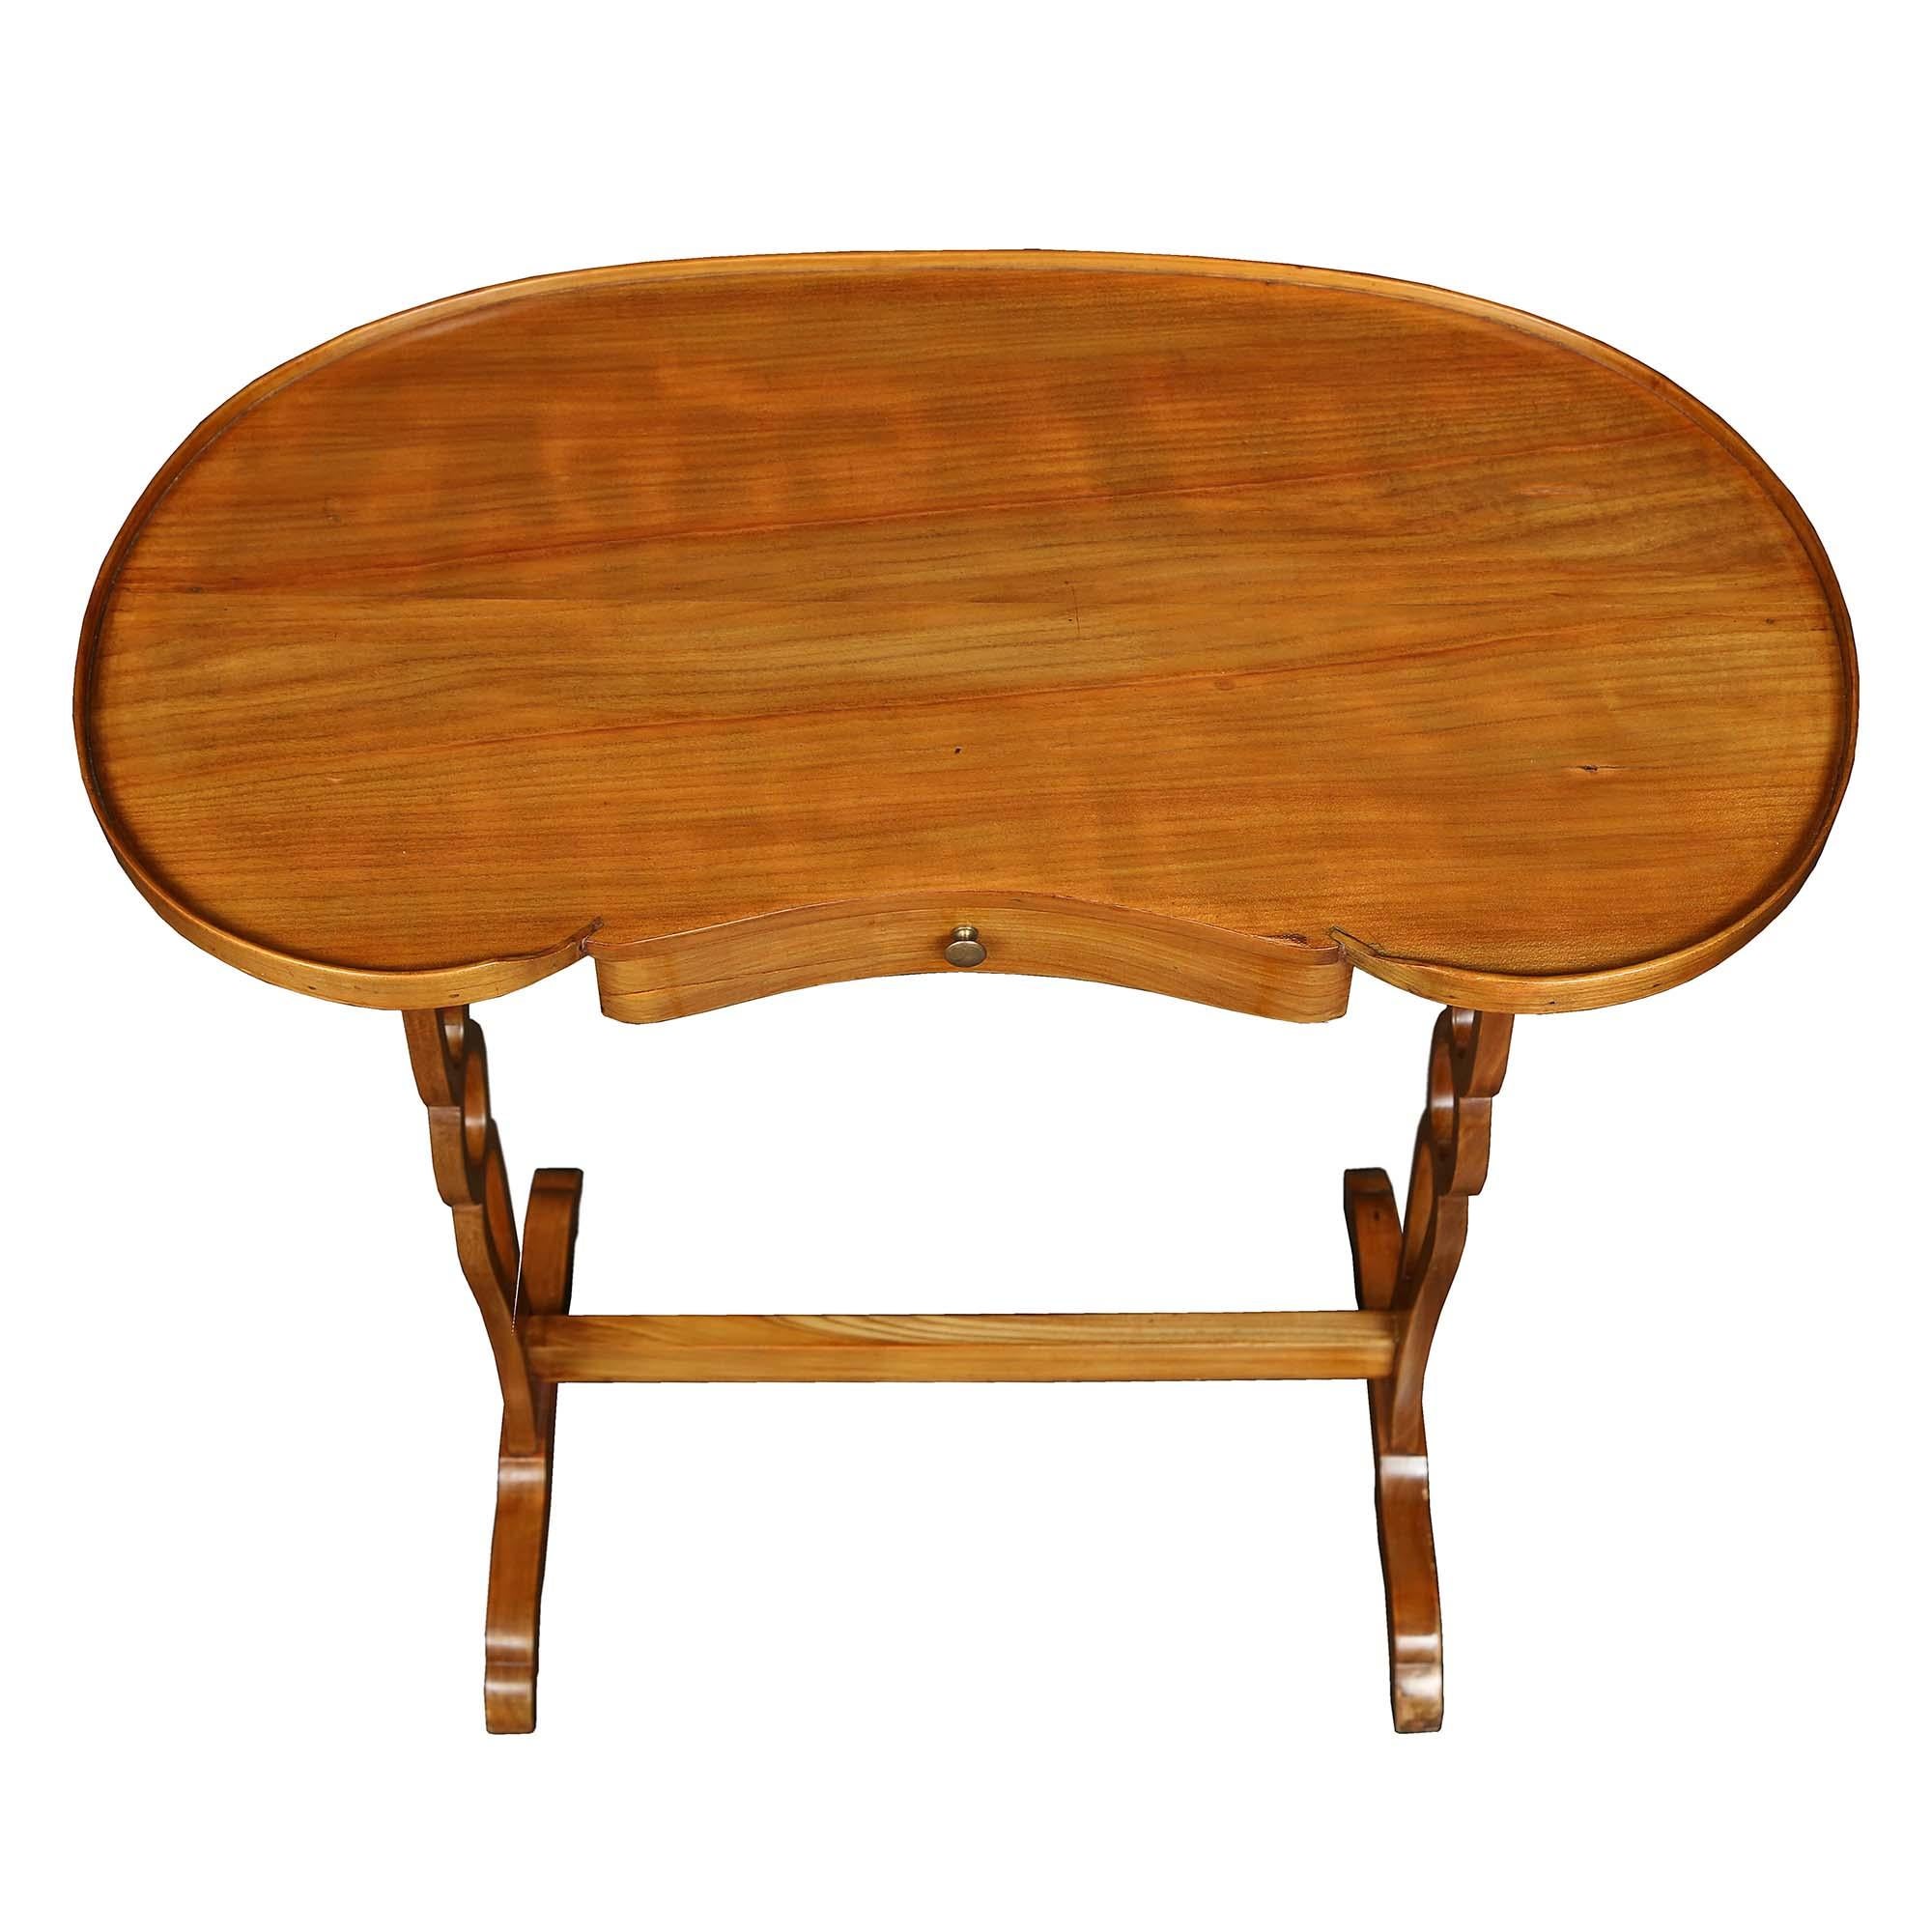 A charming French 19th century light cherry, kidney shaped table. The table is raised by two pierced trestle supports joined by a straight stretcher. The top has a kidney shaped border above one drawer with a brass knob.